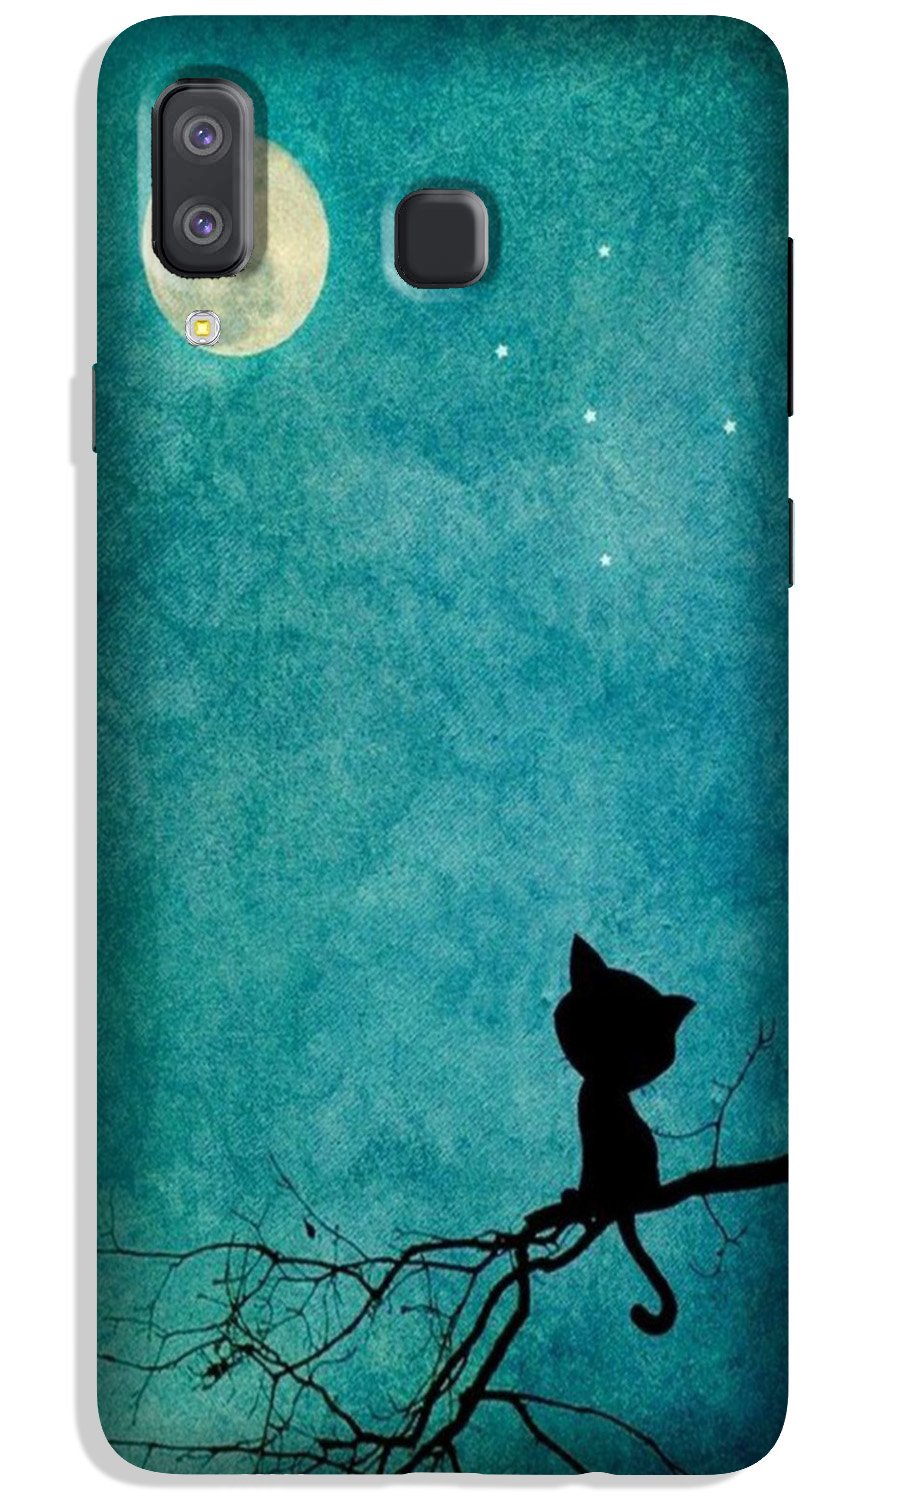 Moon cat Case for Galaxy A8 Star